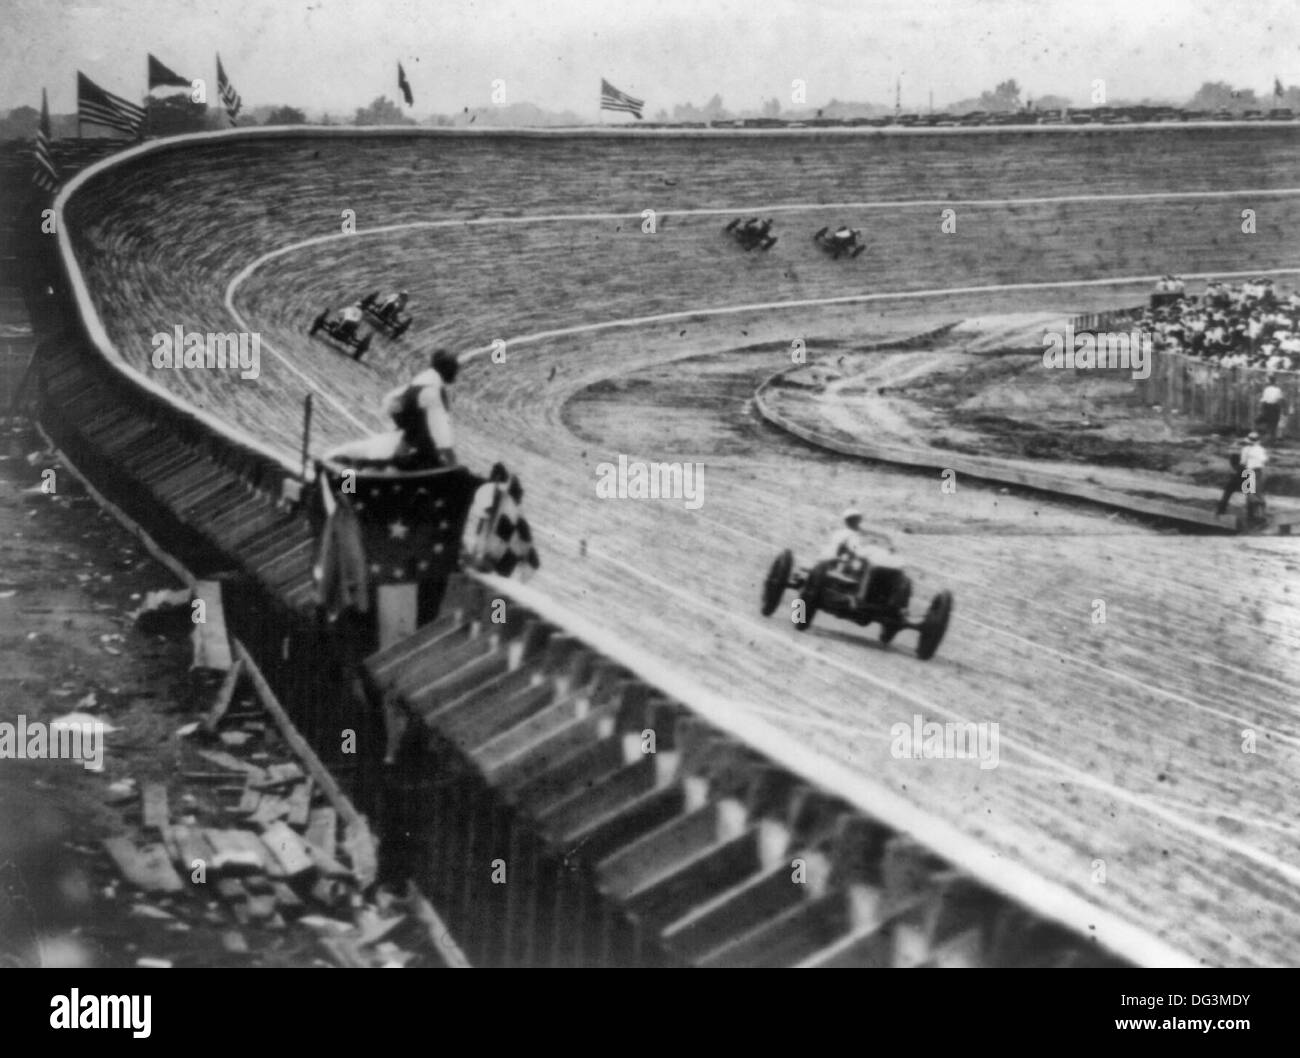 Automobile racing on curved wood track, probably in or near Washington, D.C., with flag man in foreground, circa 1922 Stock Photo